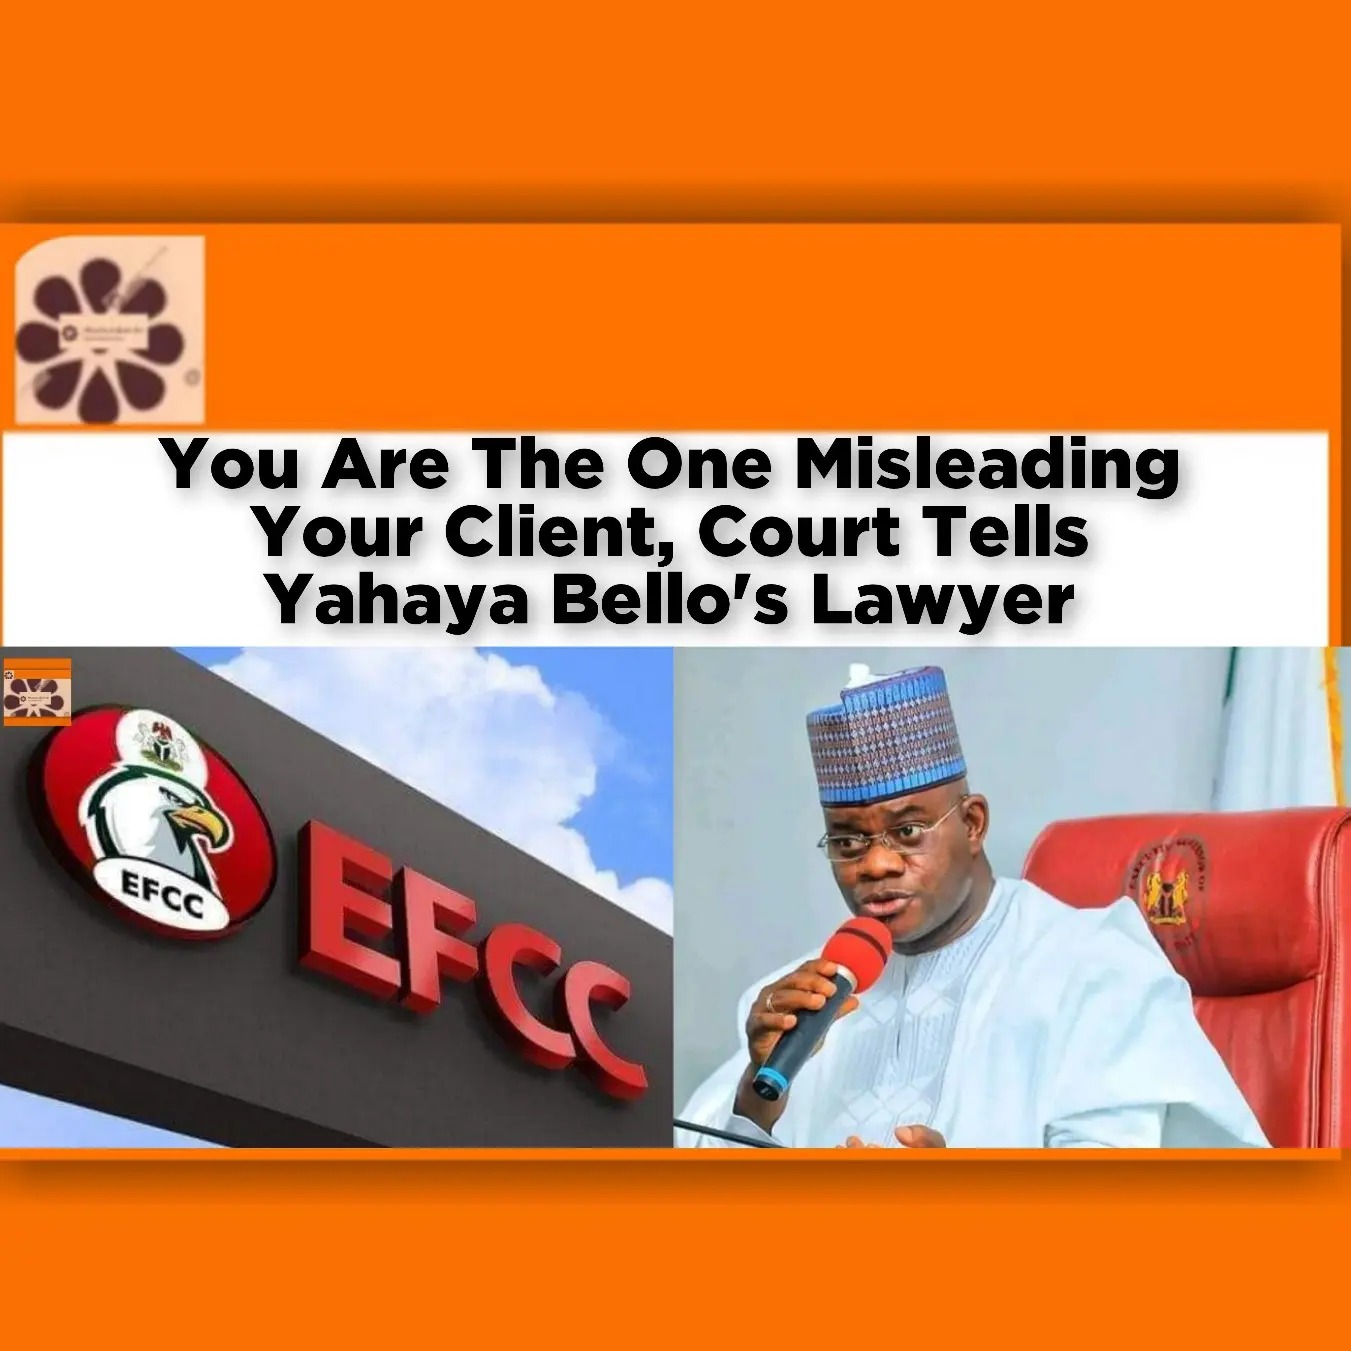 You Are The One Misleading Your Client, Court Tells Yahaya Bello's Lawyer ~ OsazuwaAkonedo #Landlords